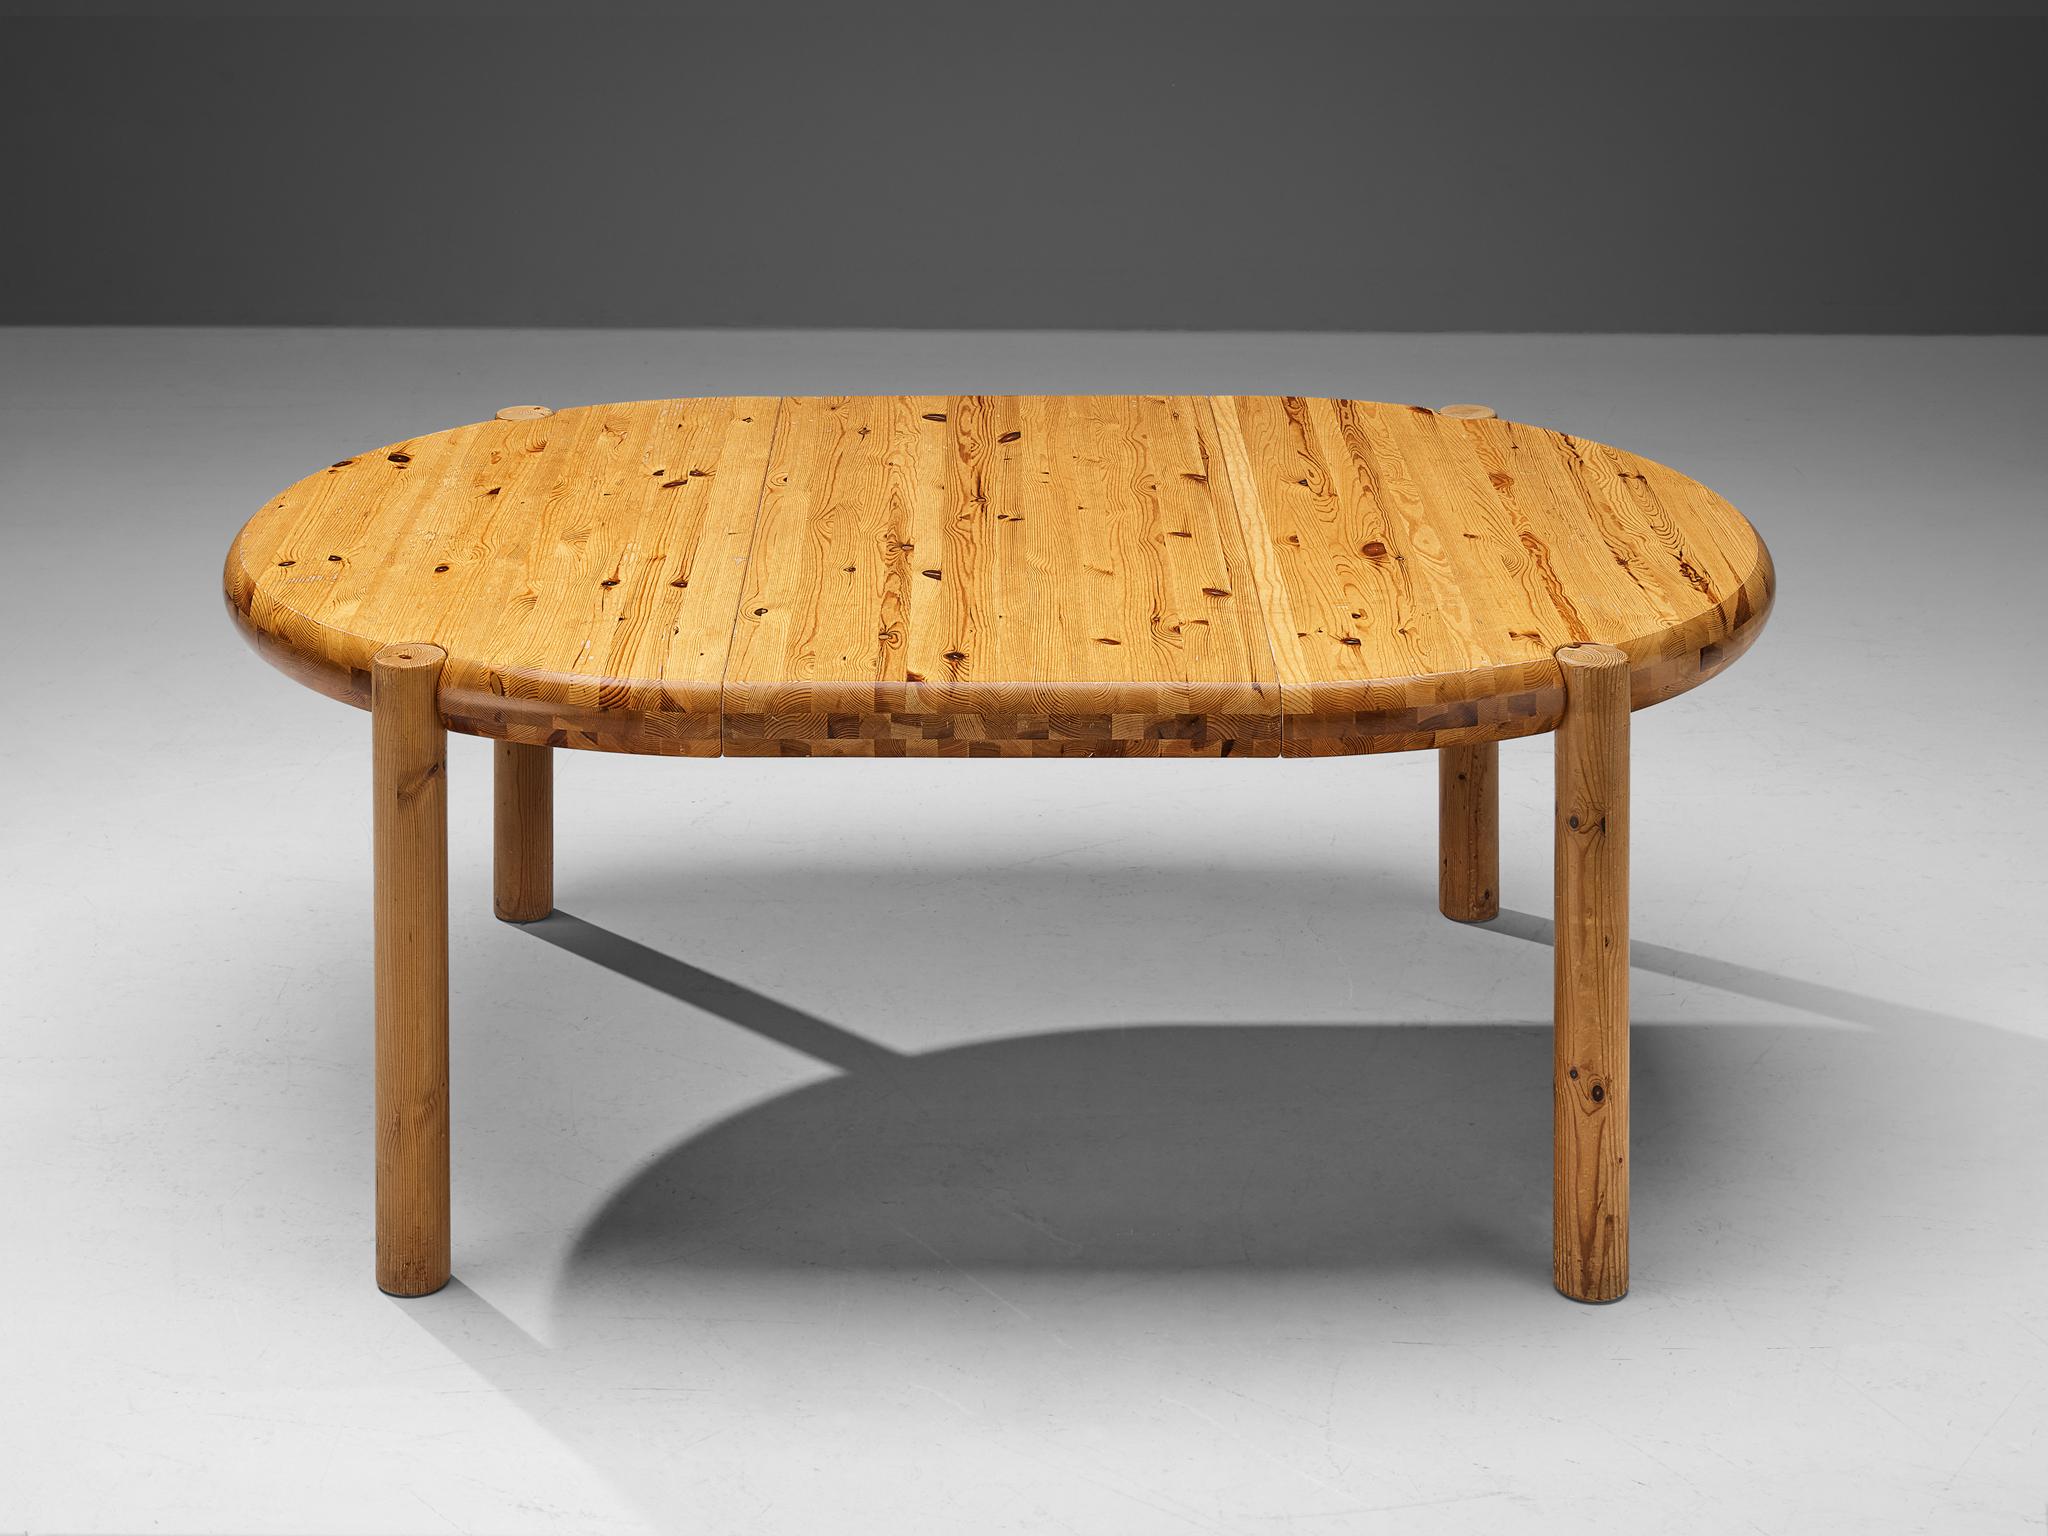 Rainer Daumiller, extendable dining table, pine, Denmark, 1970s.

This simplistic table with absence of decorative details, convinces visually through the well-balanced appearance and the stabile construction. Functional design that features a